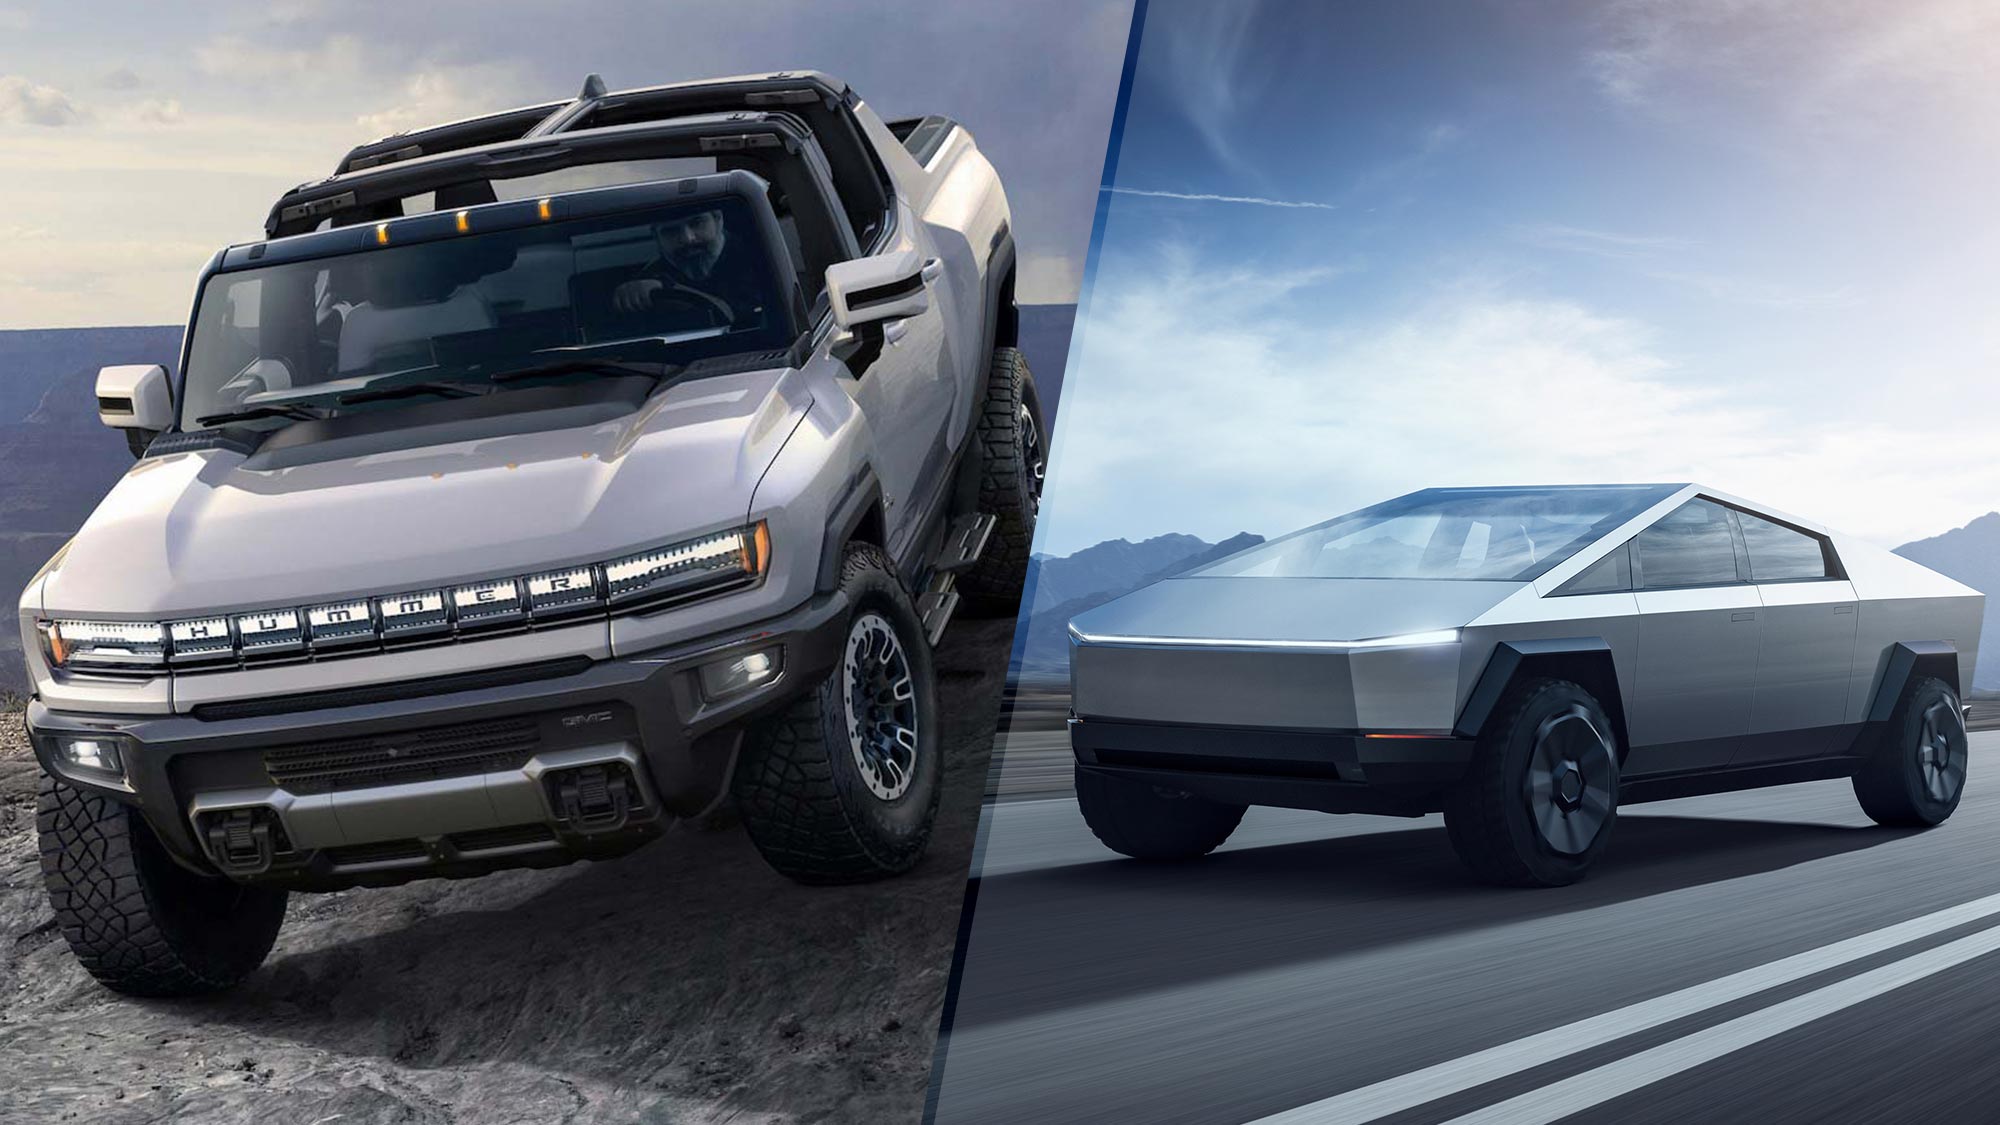 Top Tesla Cybertruck Vs Hummer H2  How Does It Compare In Terms Of Off road Capability And Size  of all time Don t miss out 